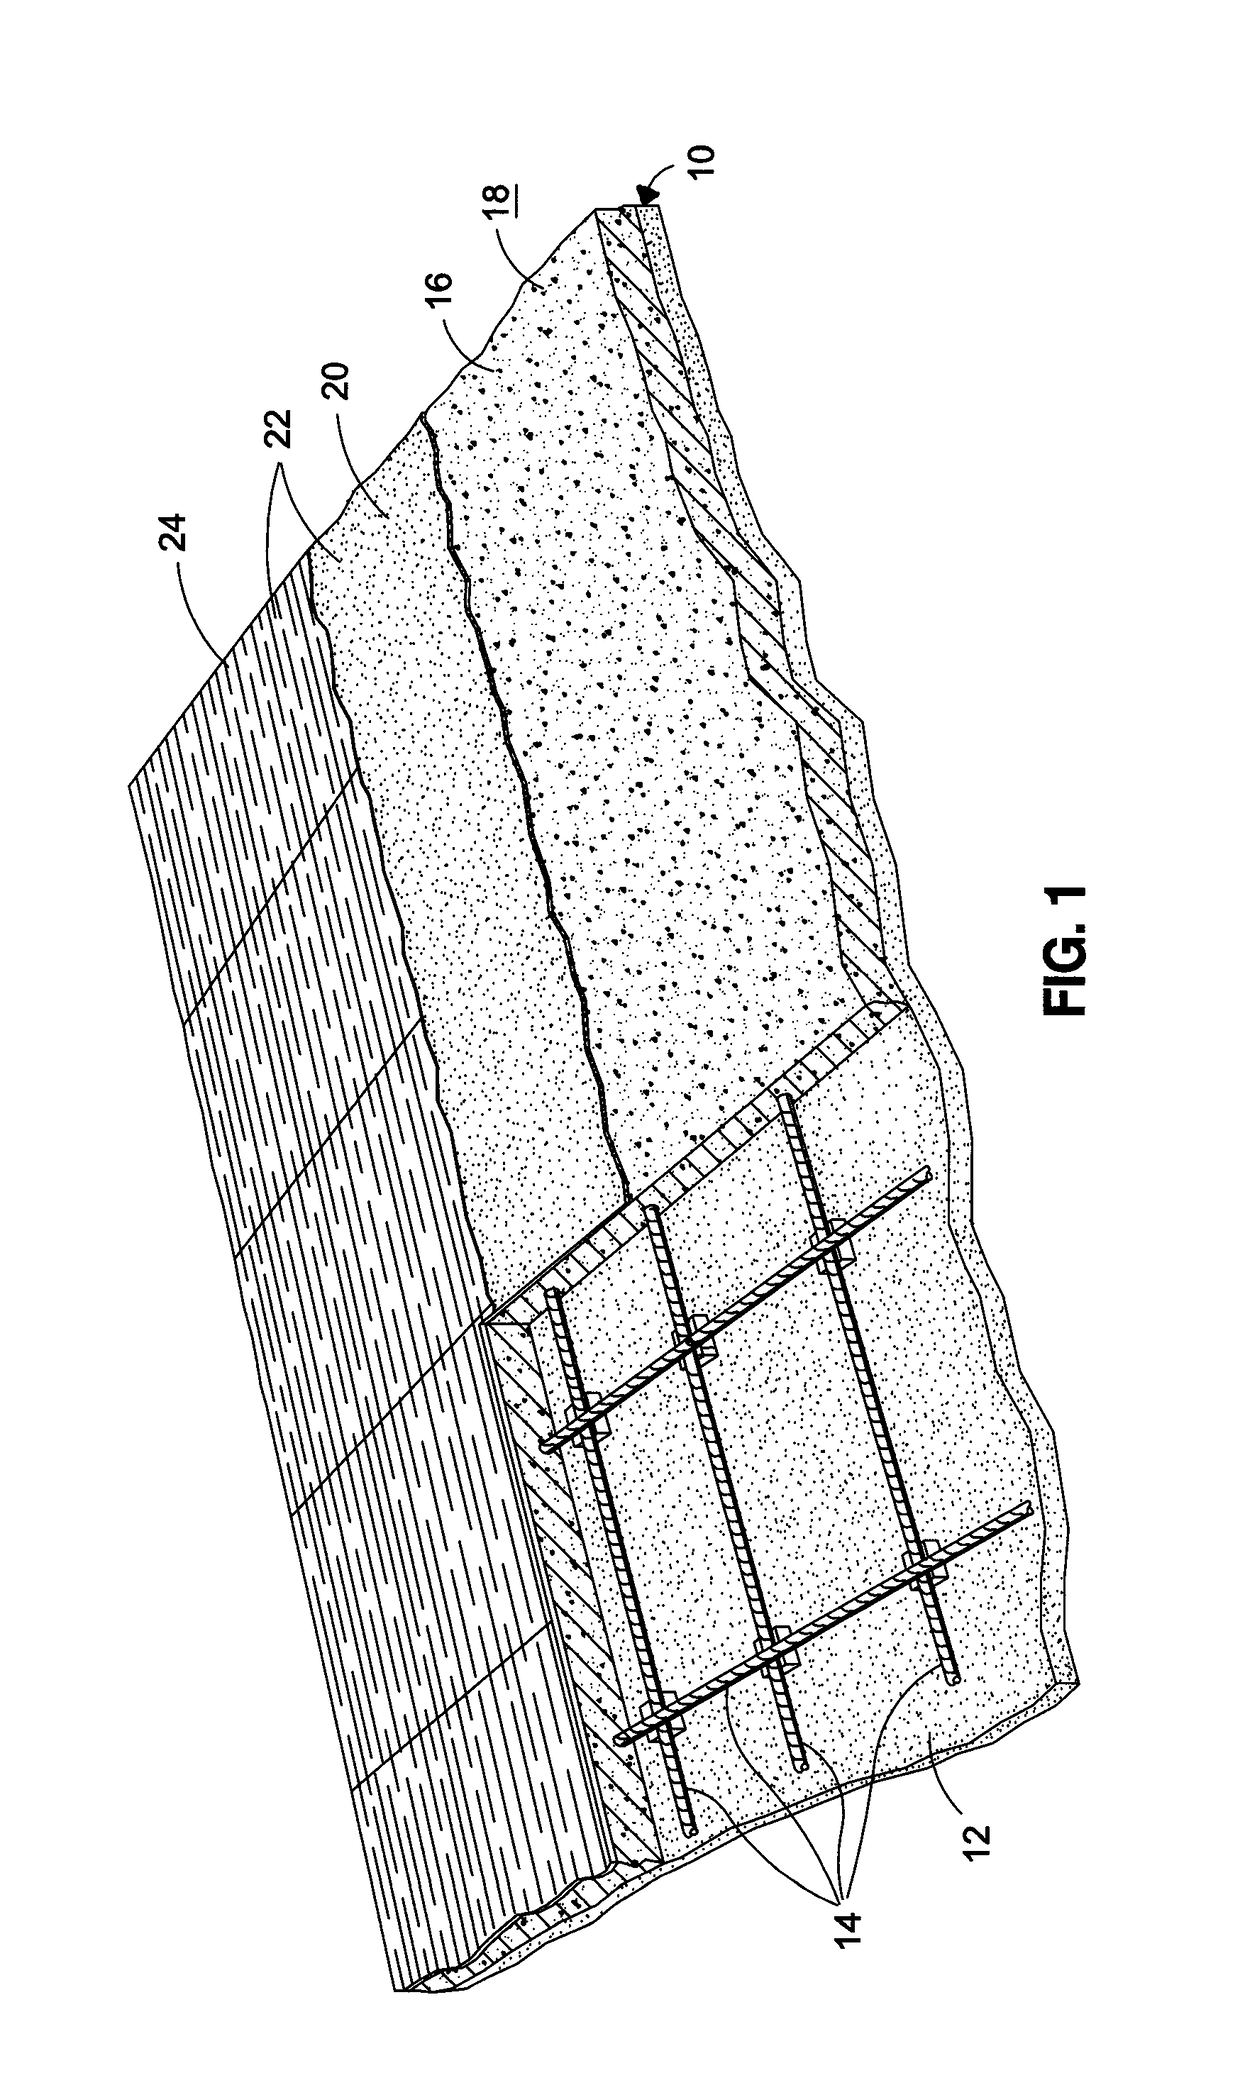 Decorative concrete with uniform surface and method of forming the same